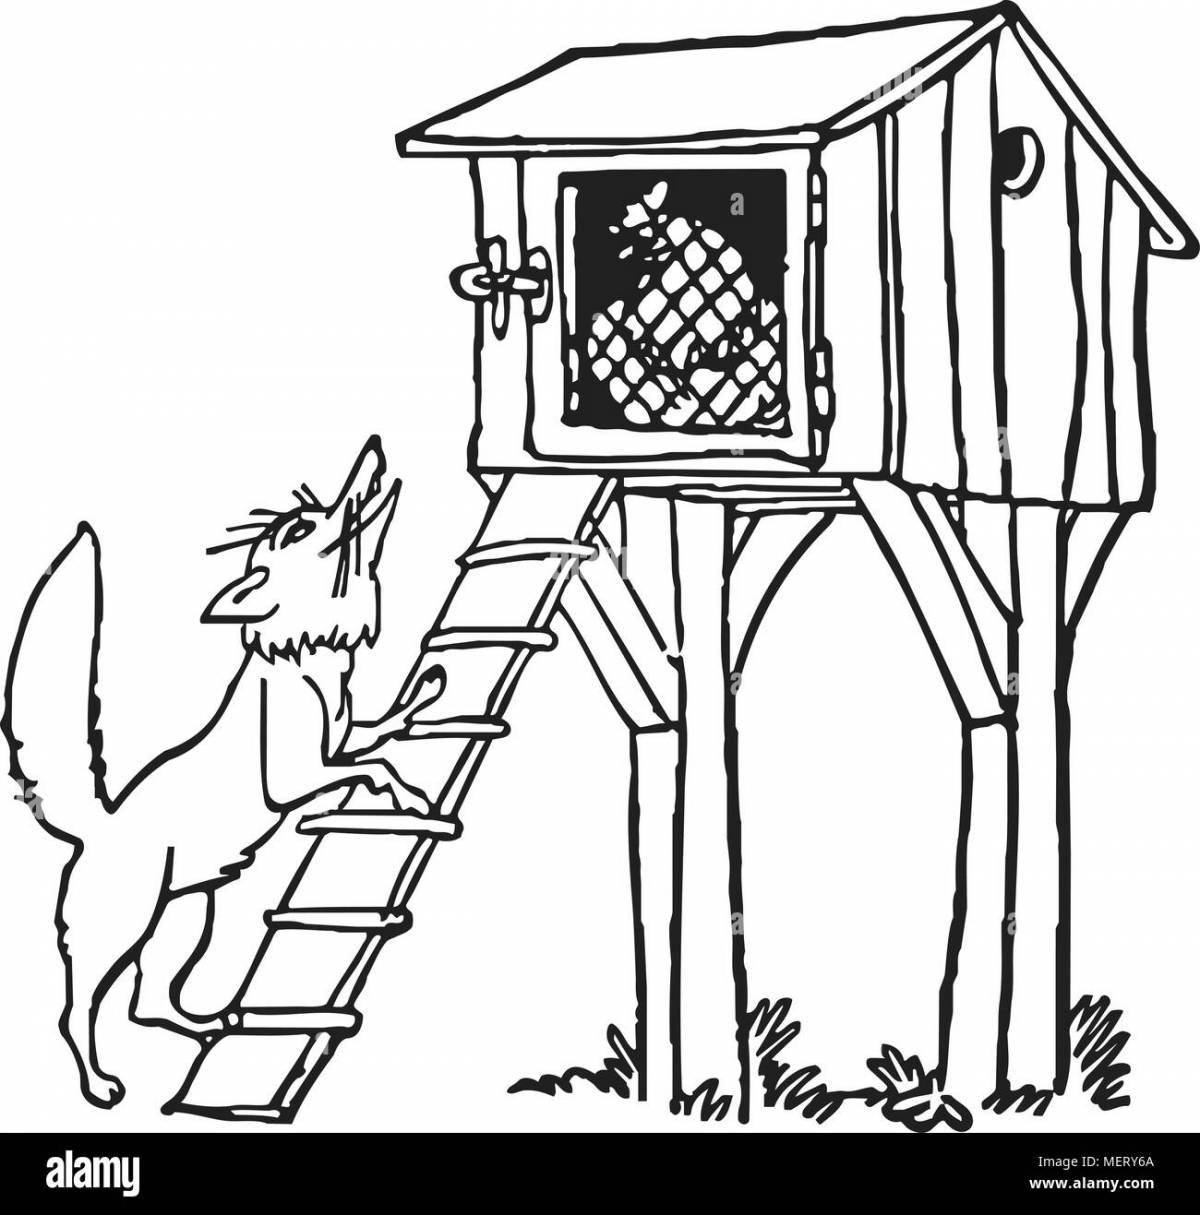 Magic Chicken Coop coloring page